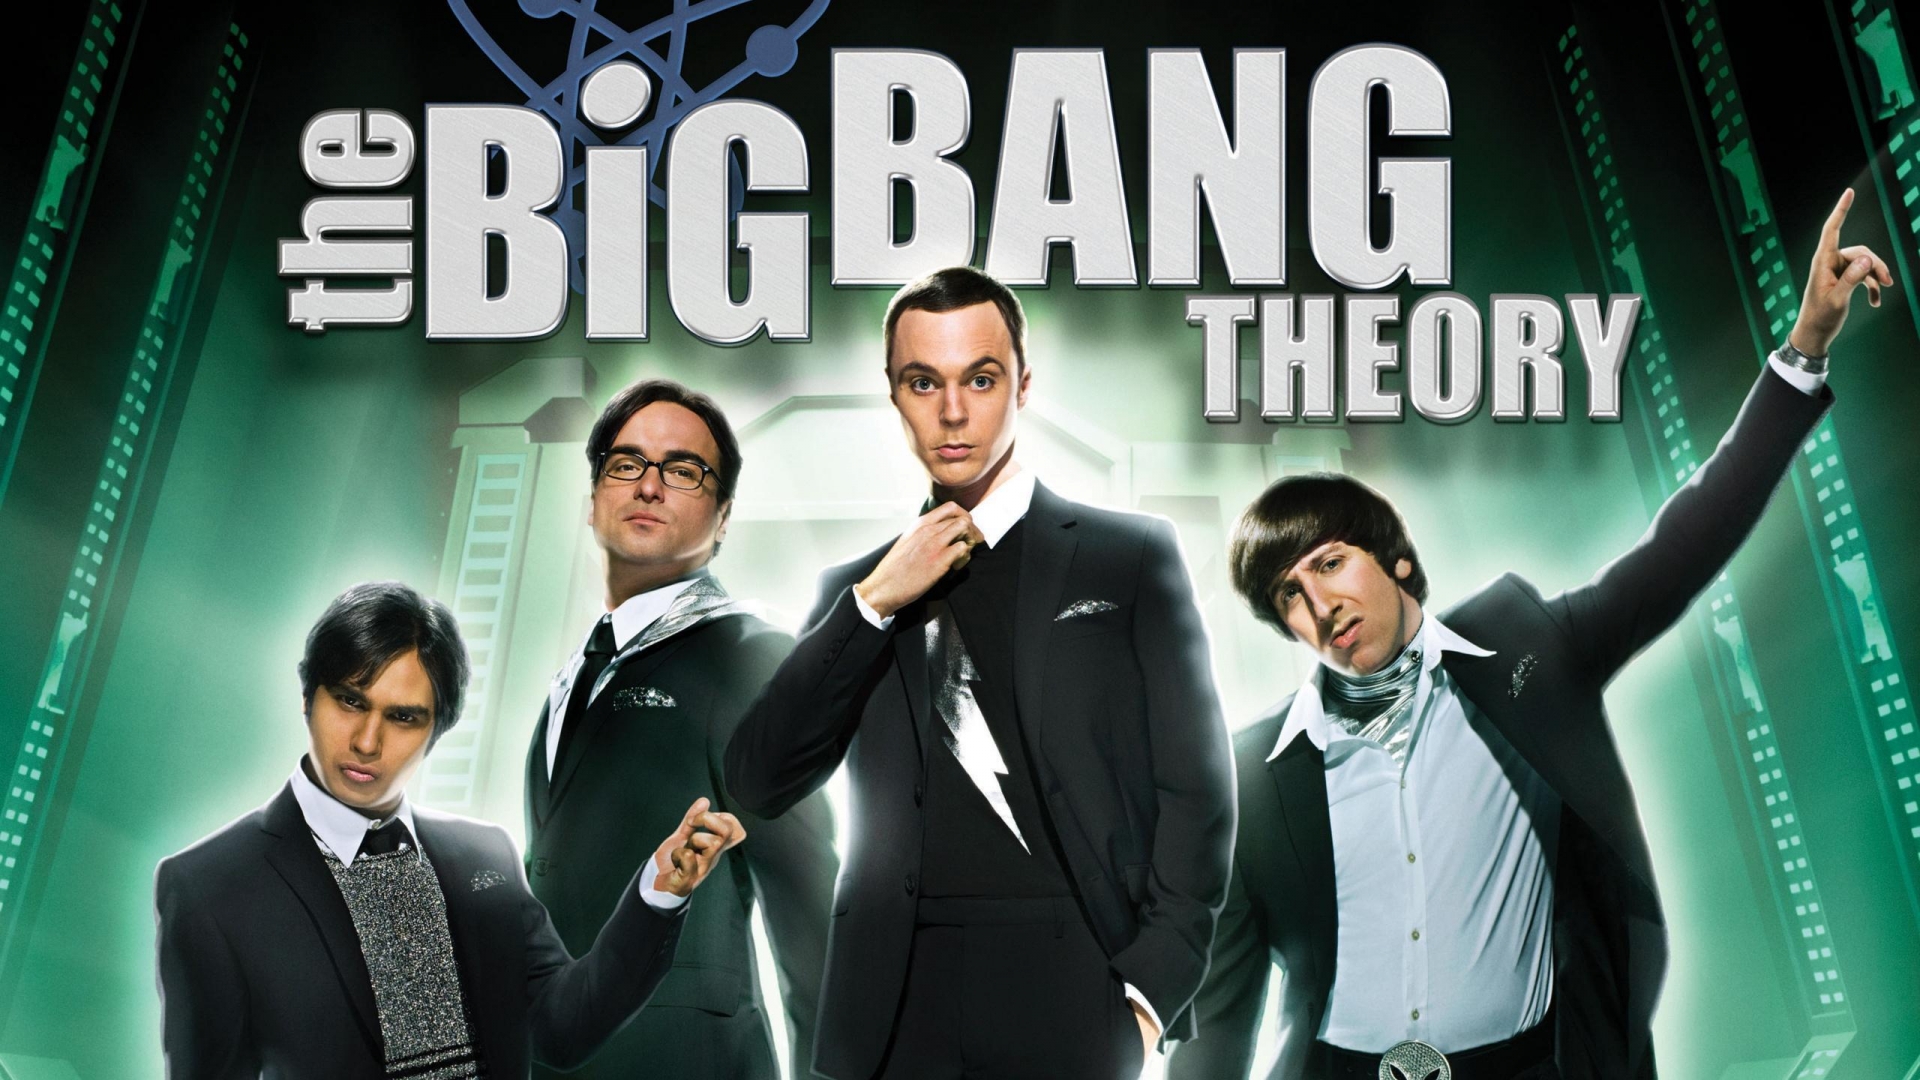 The Big Bang Theory Cool for 1920 x 1080 HDTV 1080p resolution